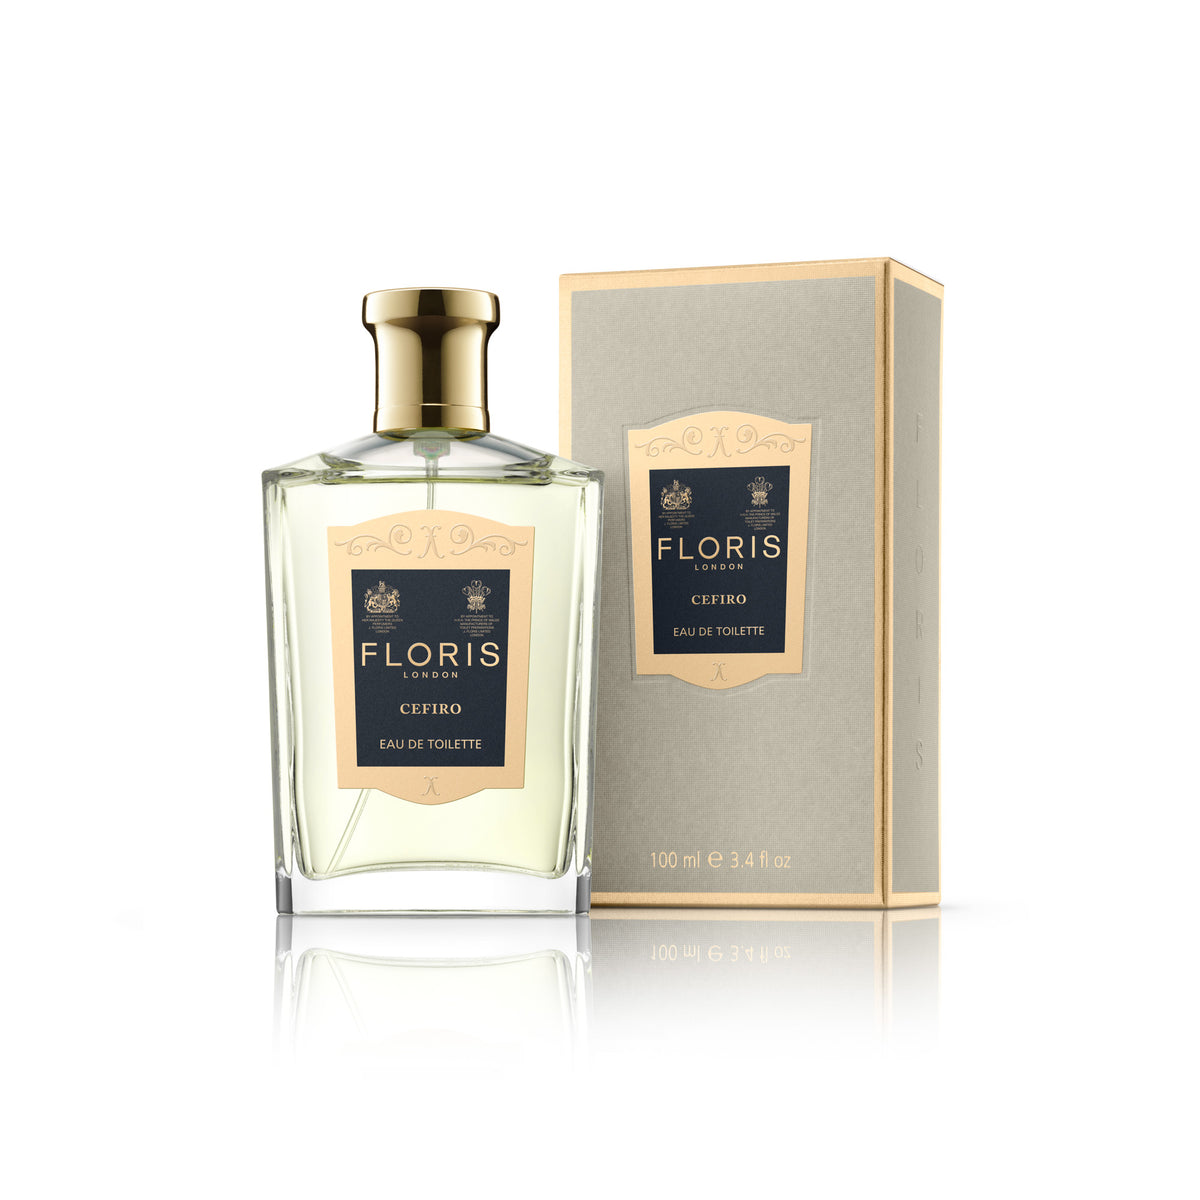 A bottle of FLORIS Cefiro 100 ML cologne for men and women on a white background by KirbyAllison.com.